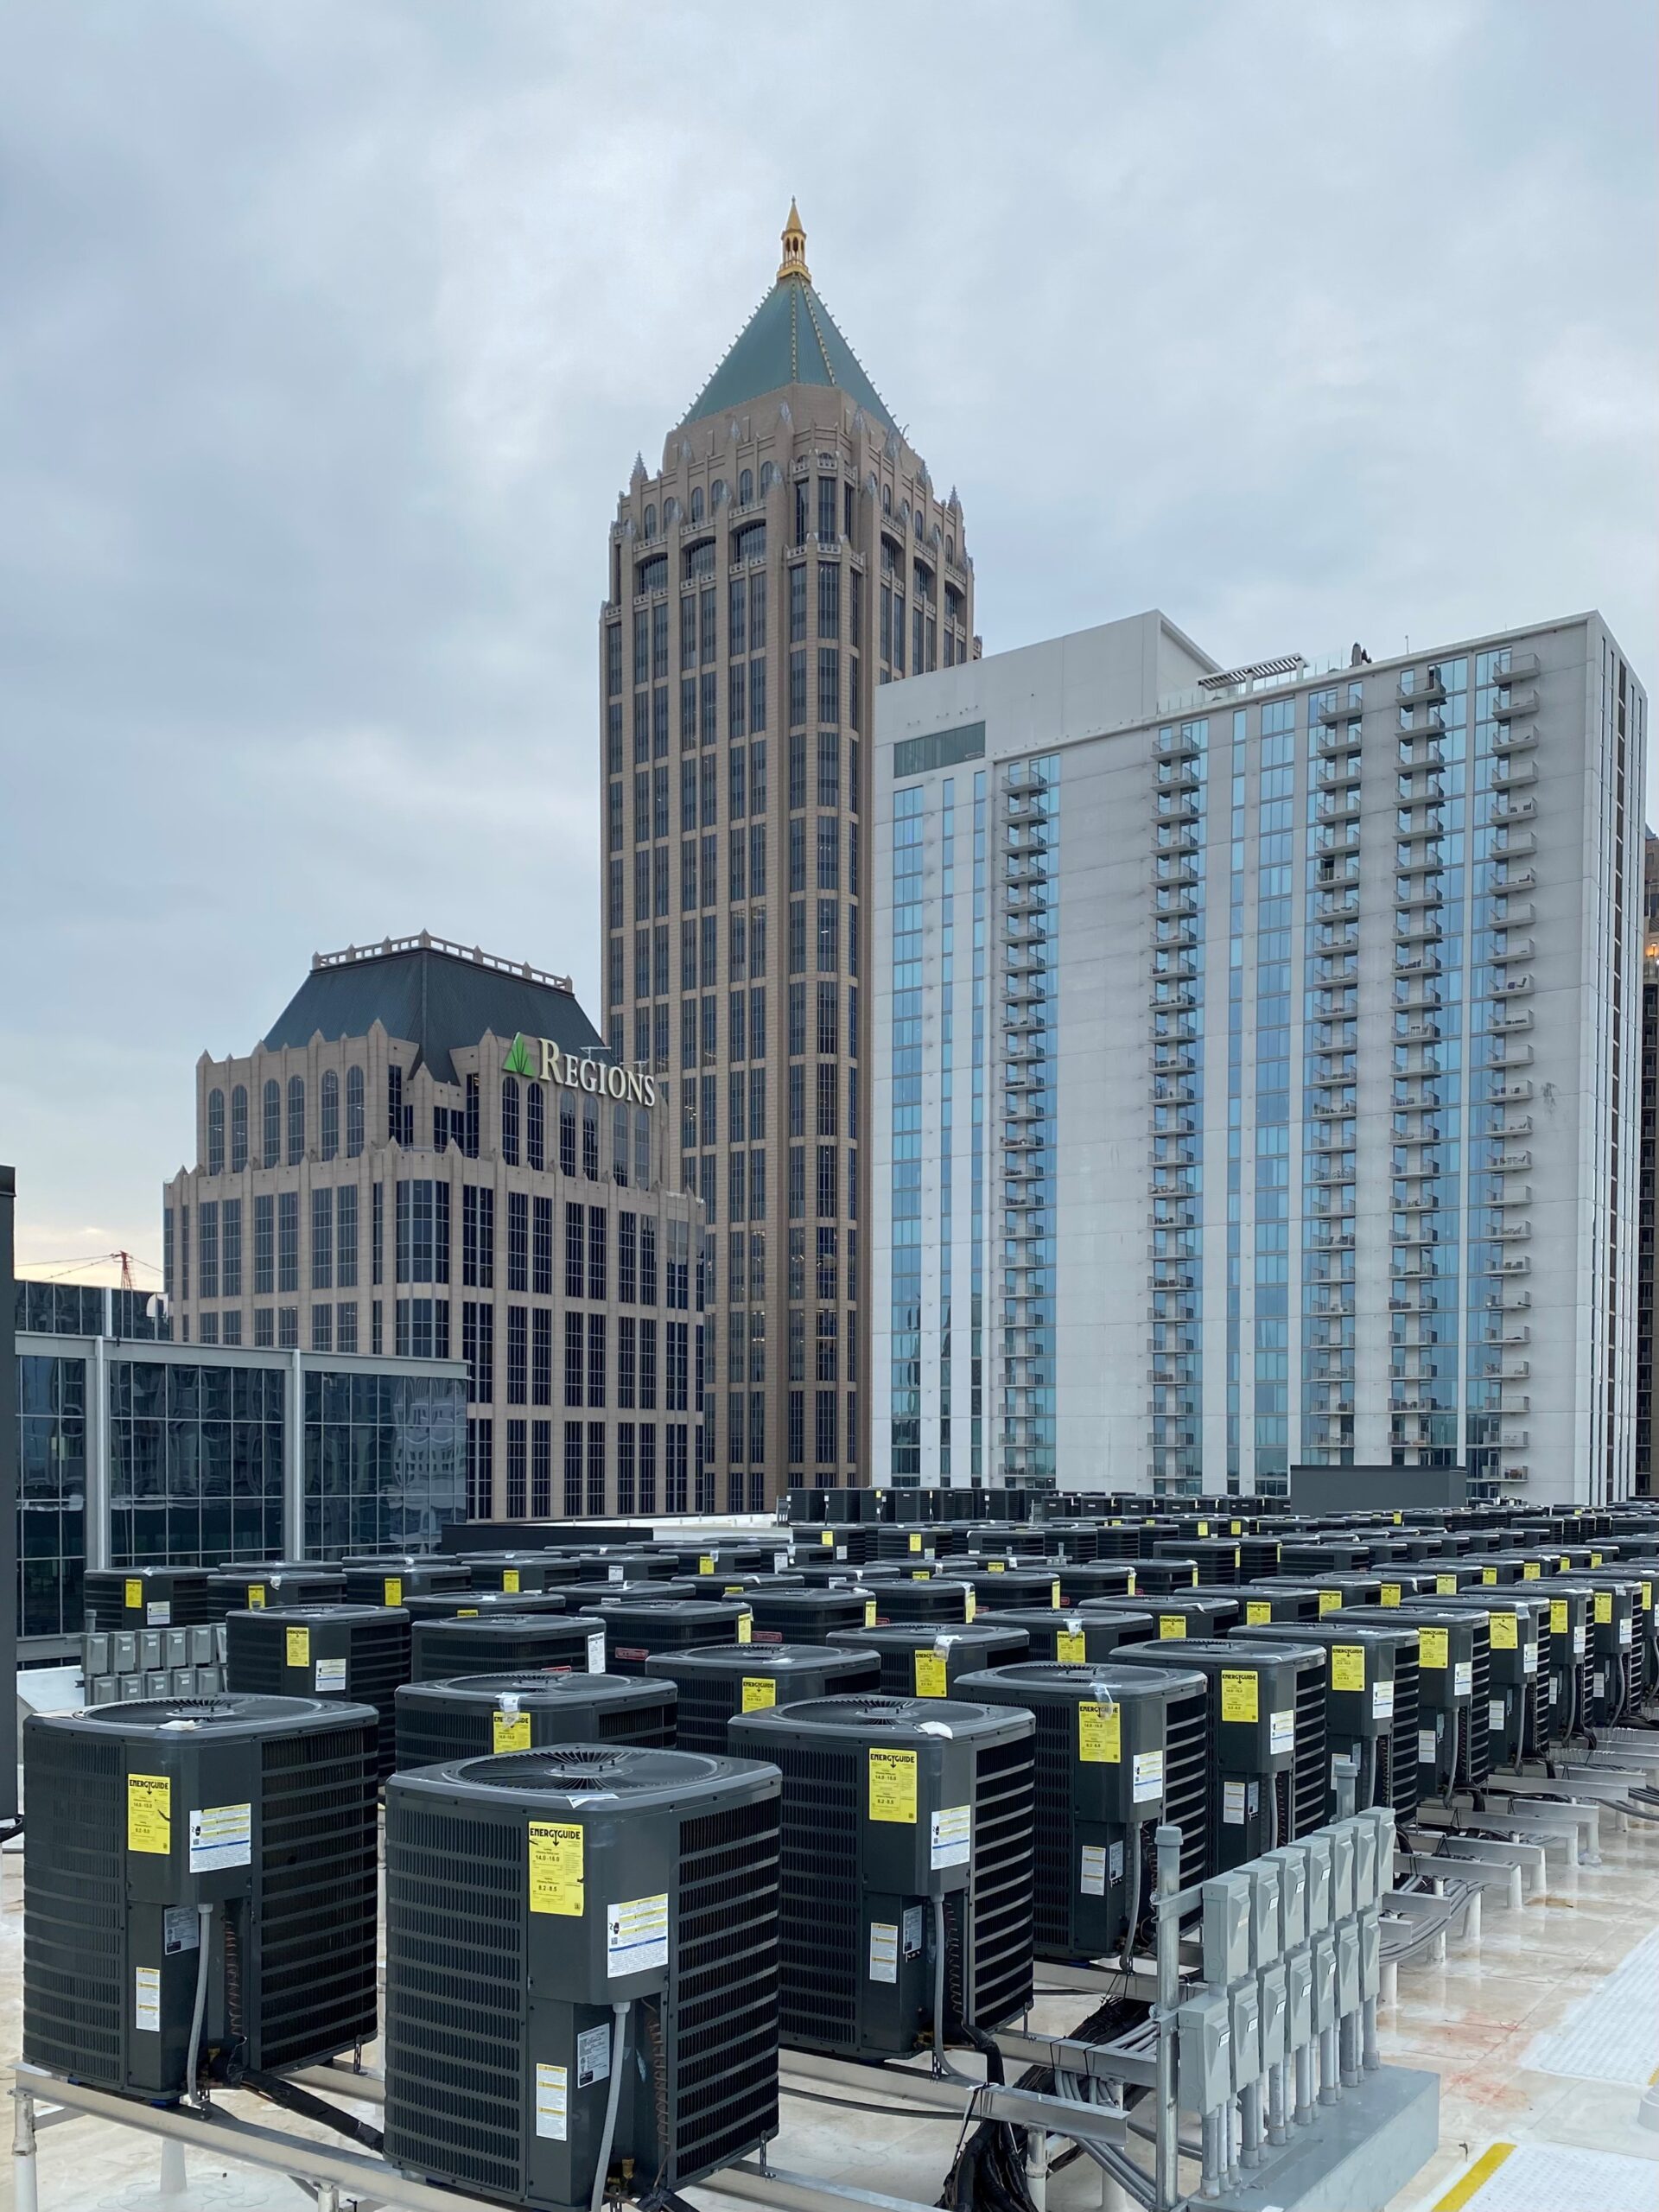 HVAC units with skyscrapers in background